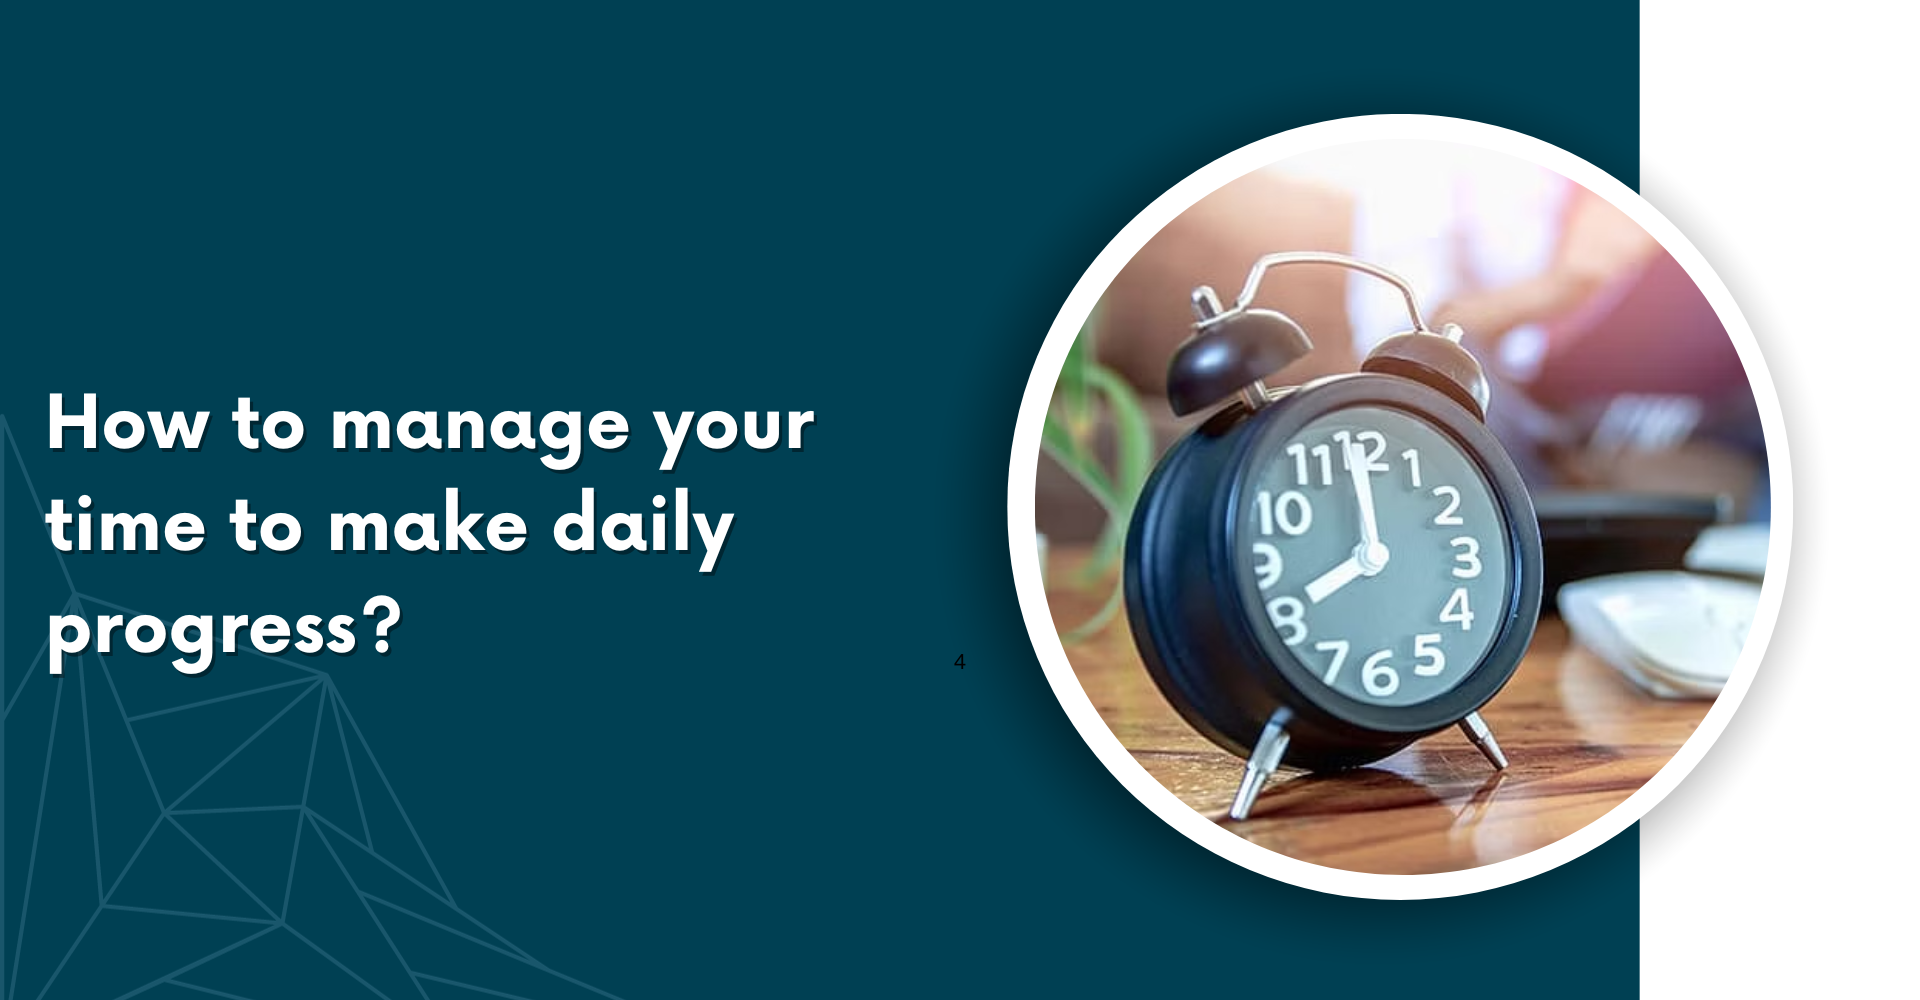 How to manage your time to make daily progress?